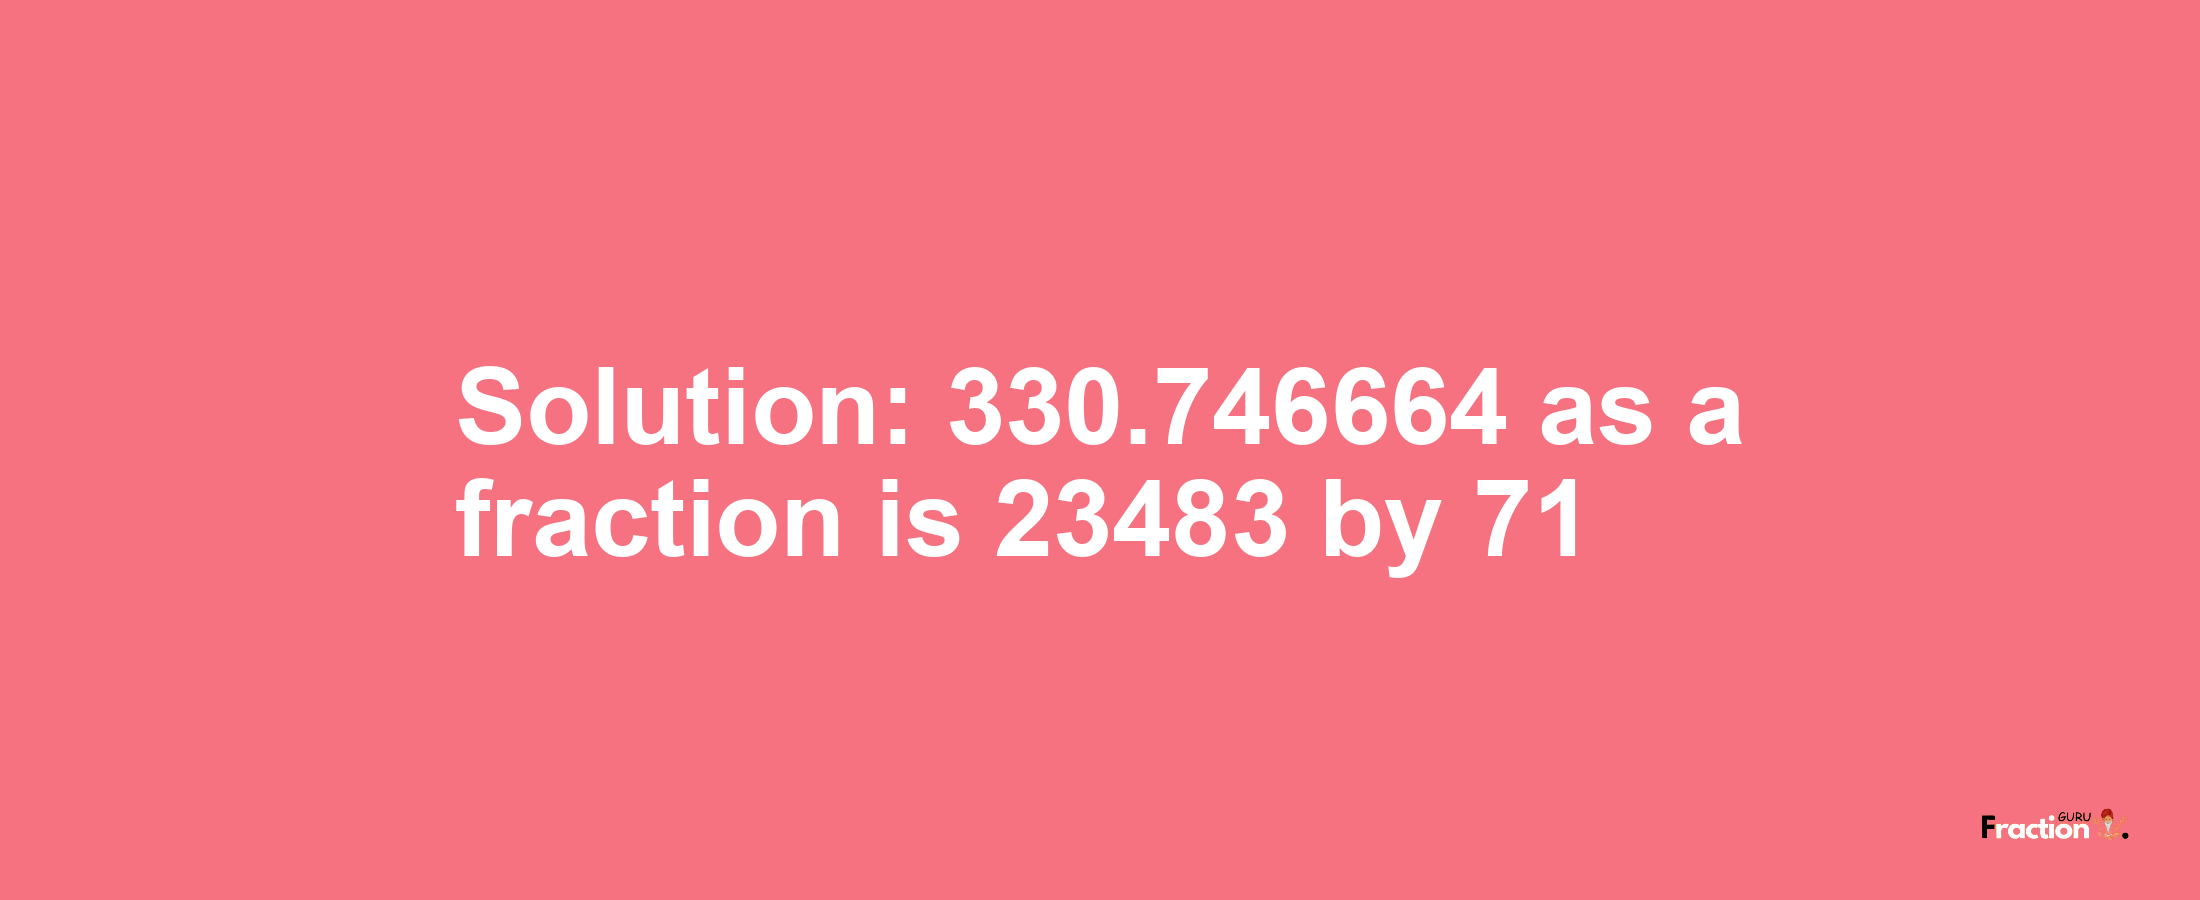 Solution:330.746664 as a fraction is 23483/71